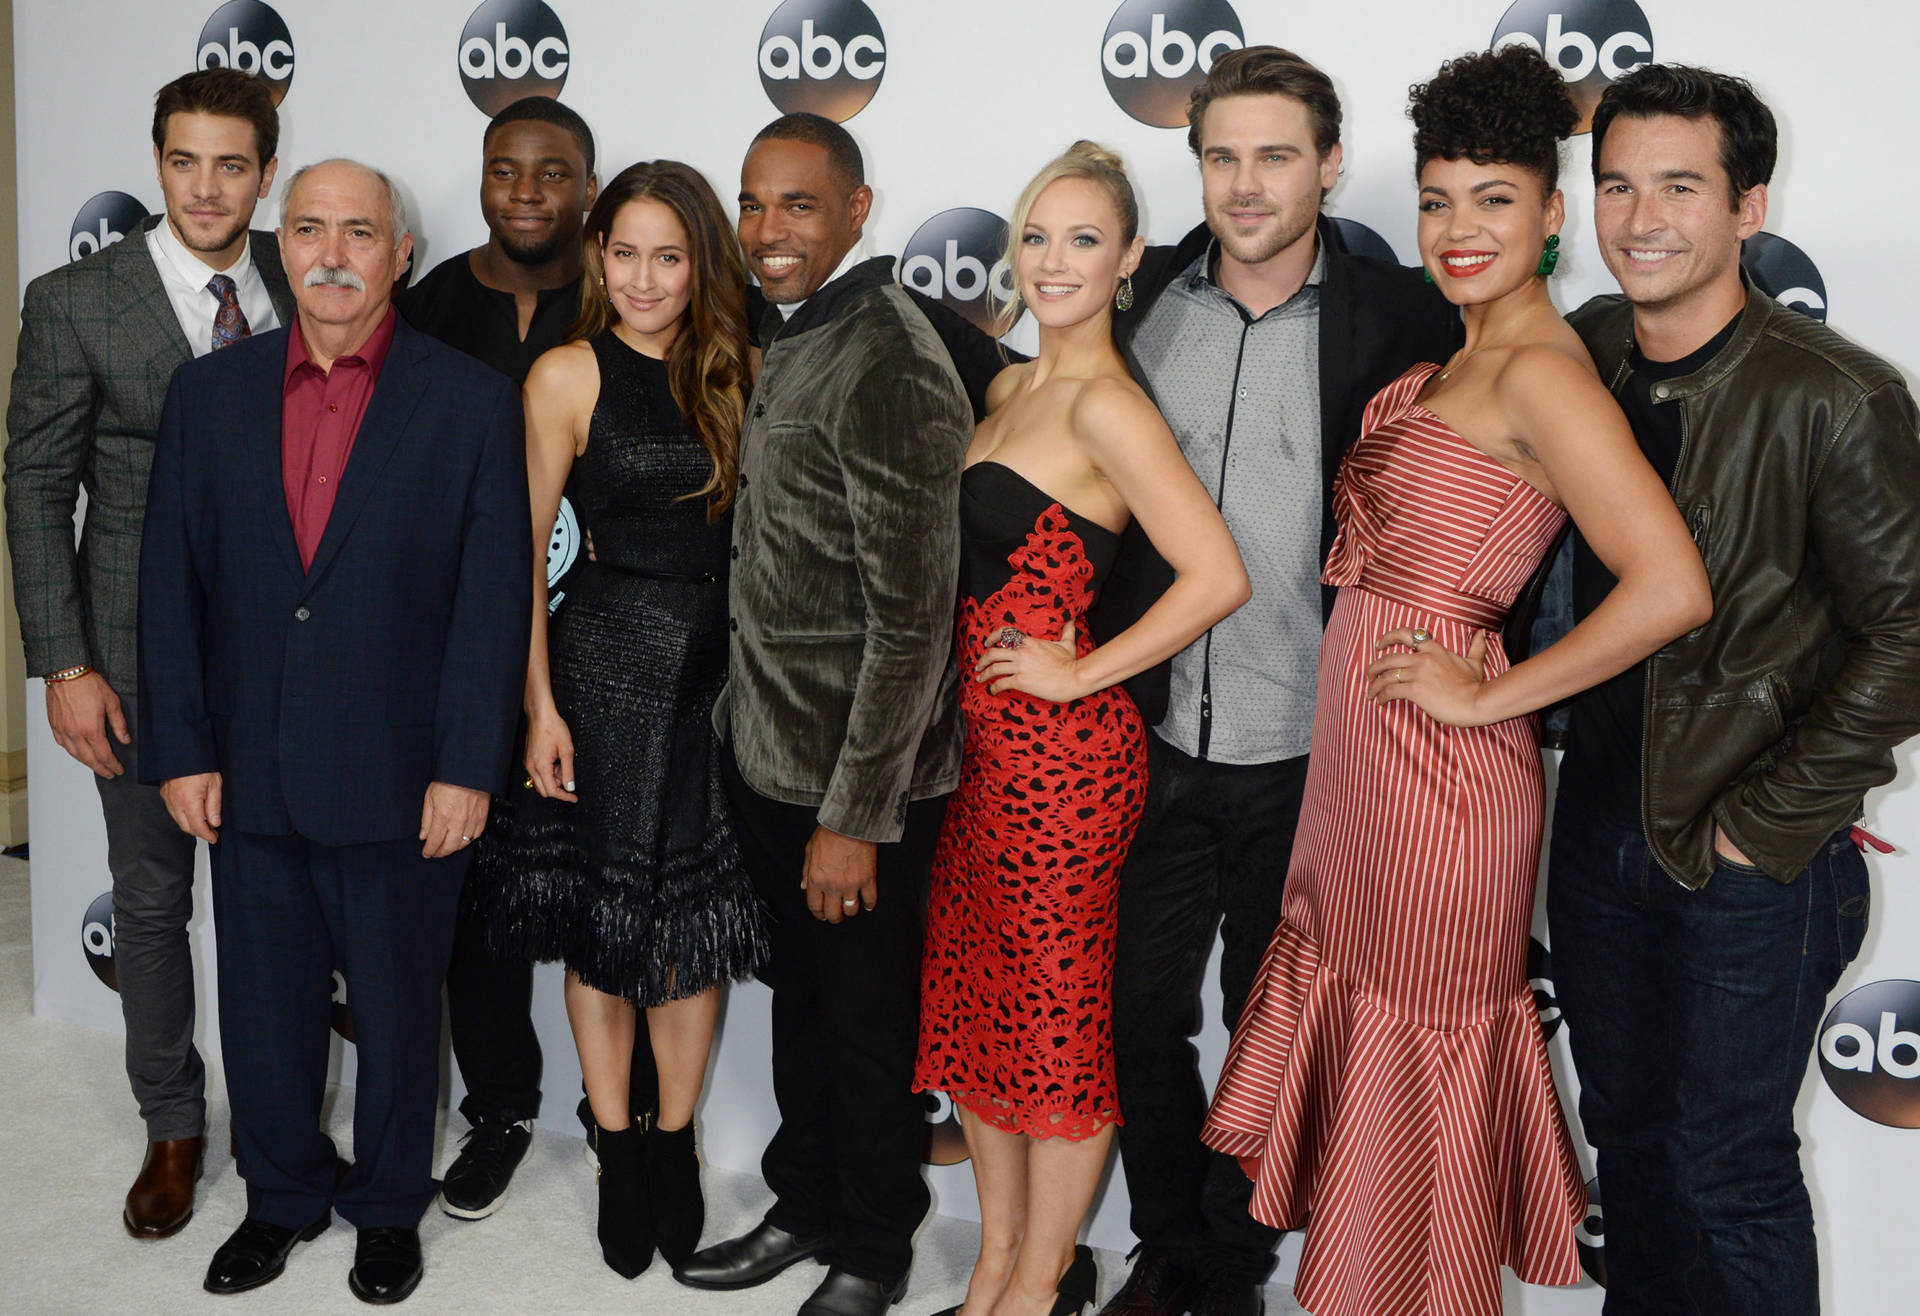 Captivated Cast Of Abc's Station 19: A Moment From The Premiere. Background